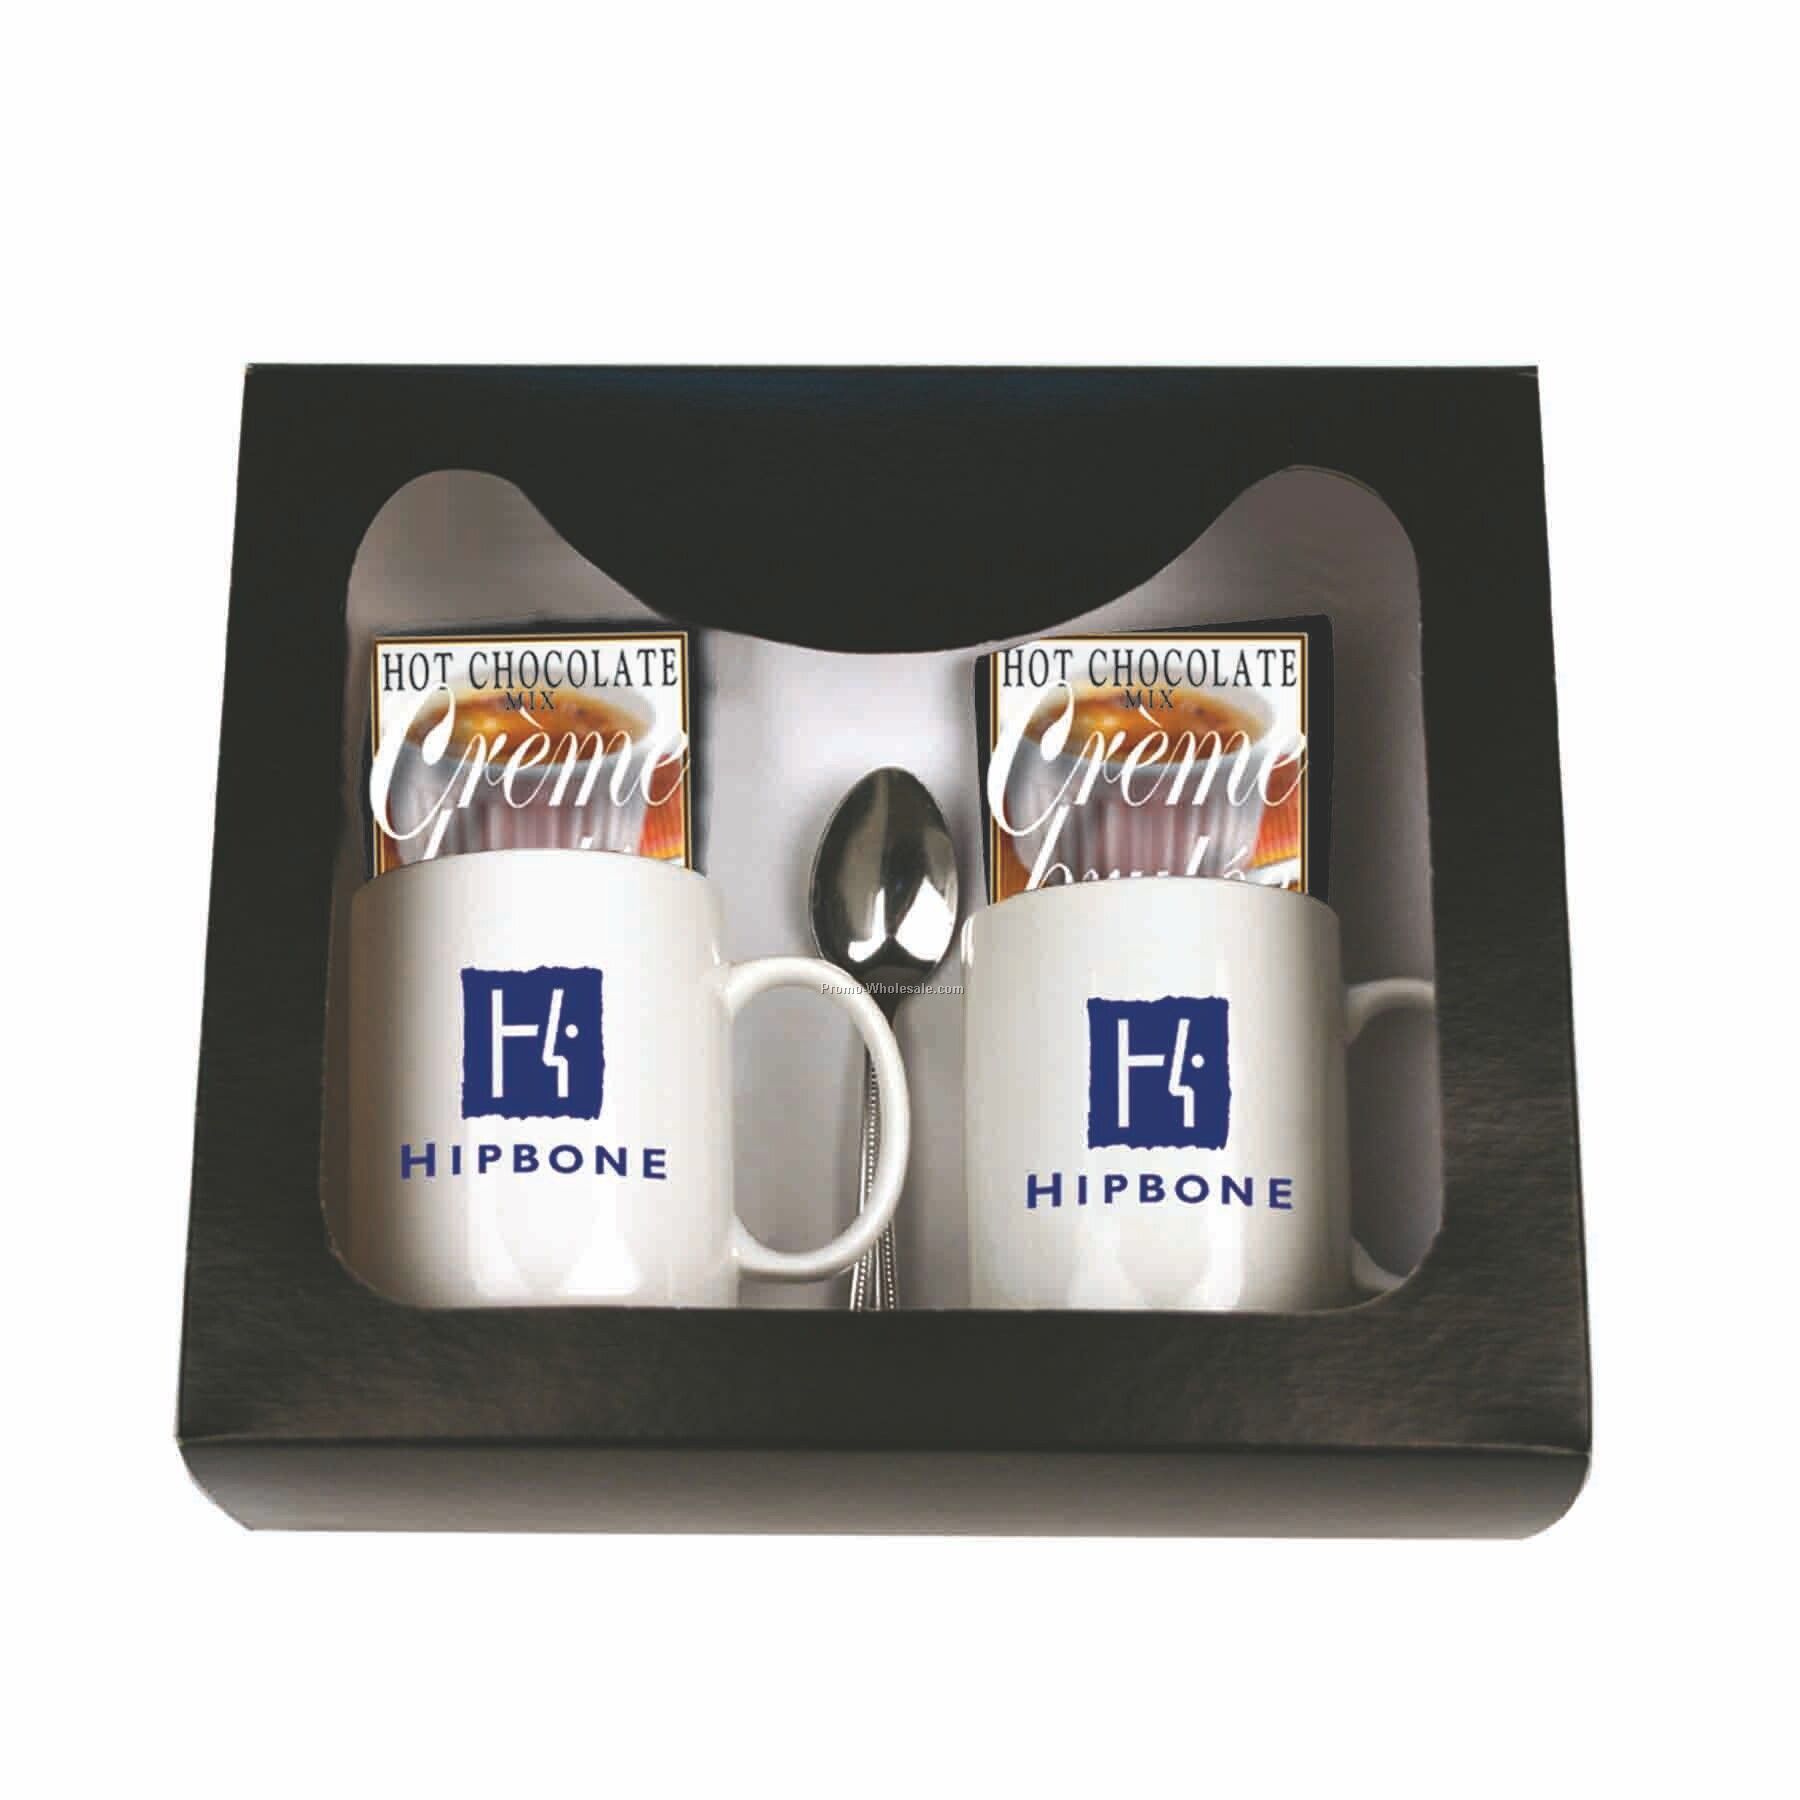 Hot Chocolate For 2 Gourmet Gift Set (Creme Brulee W/ Marshmallows)